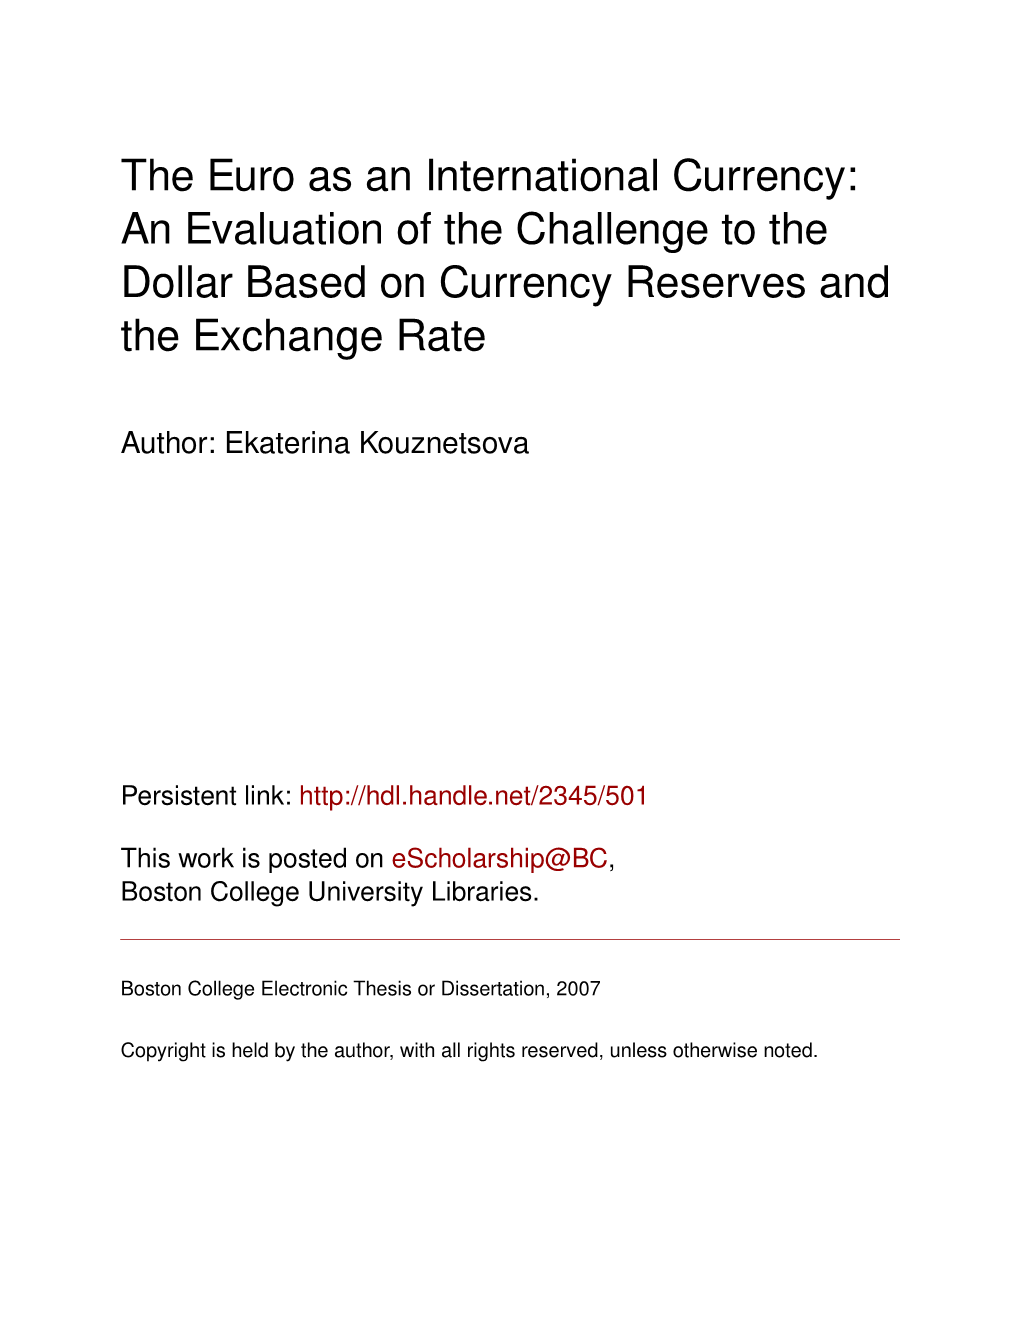 The Euro As an International Currency: an Evaluation of the Challenge to the Dollar Based on Currency Reserves and the Exchange Rate